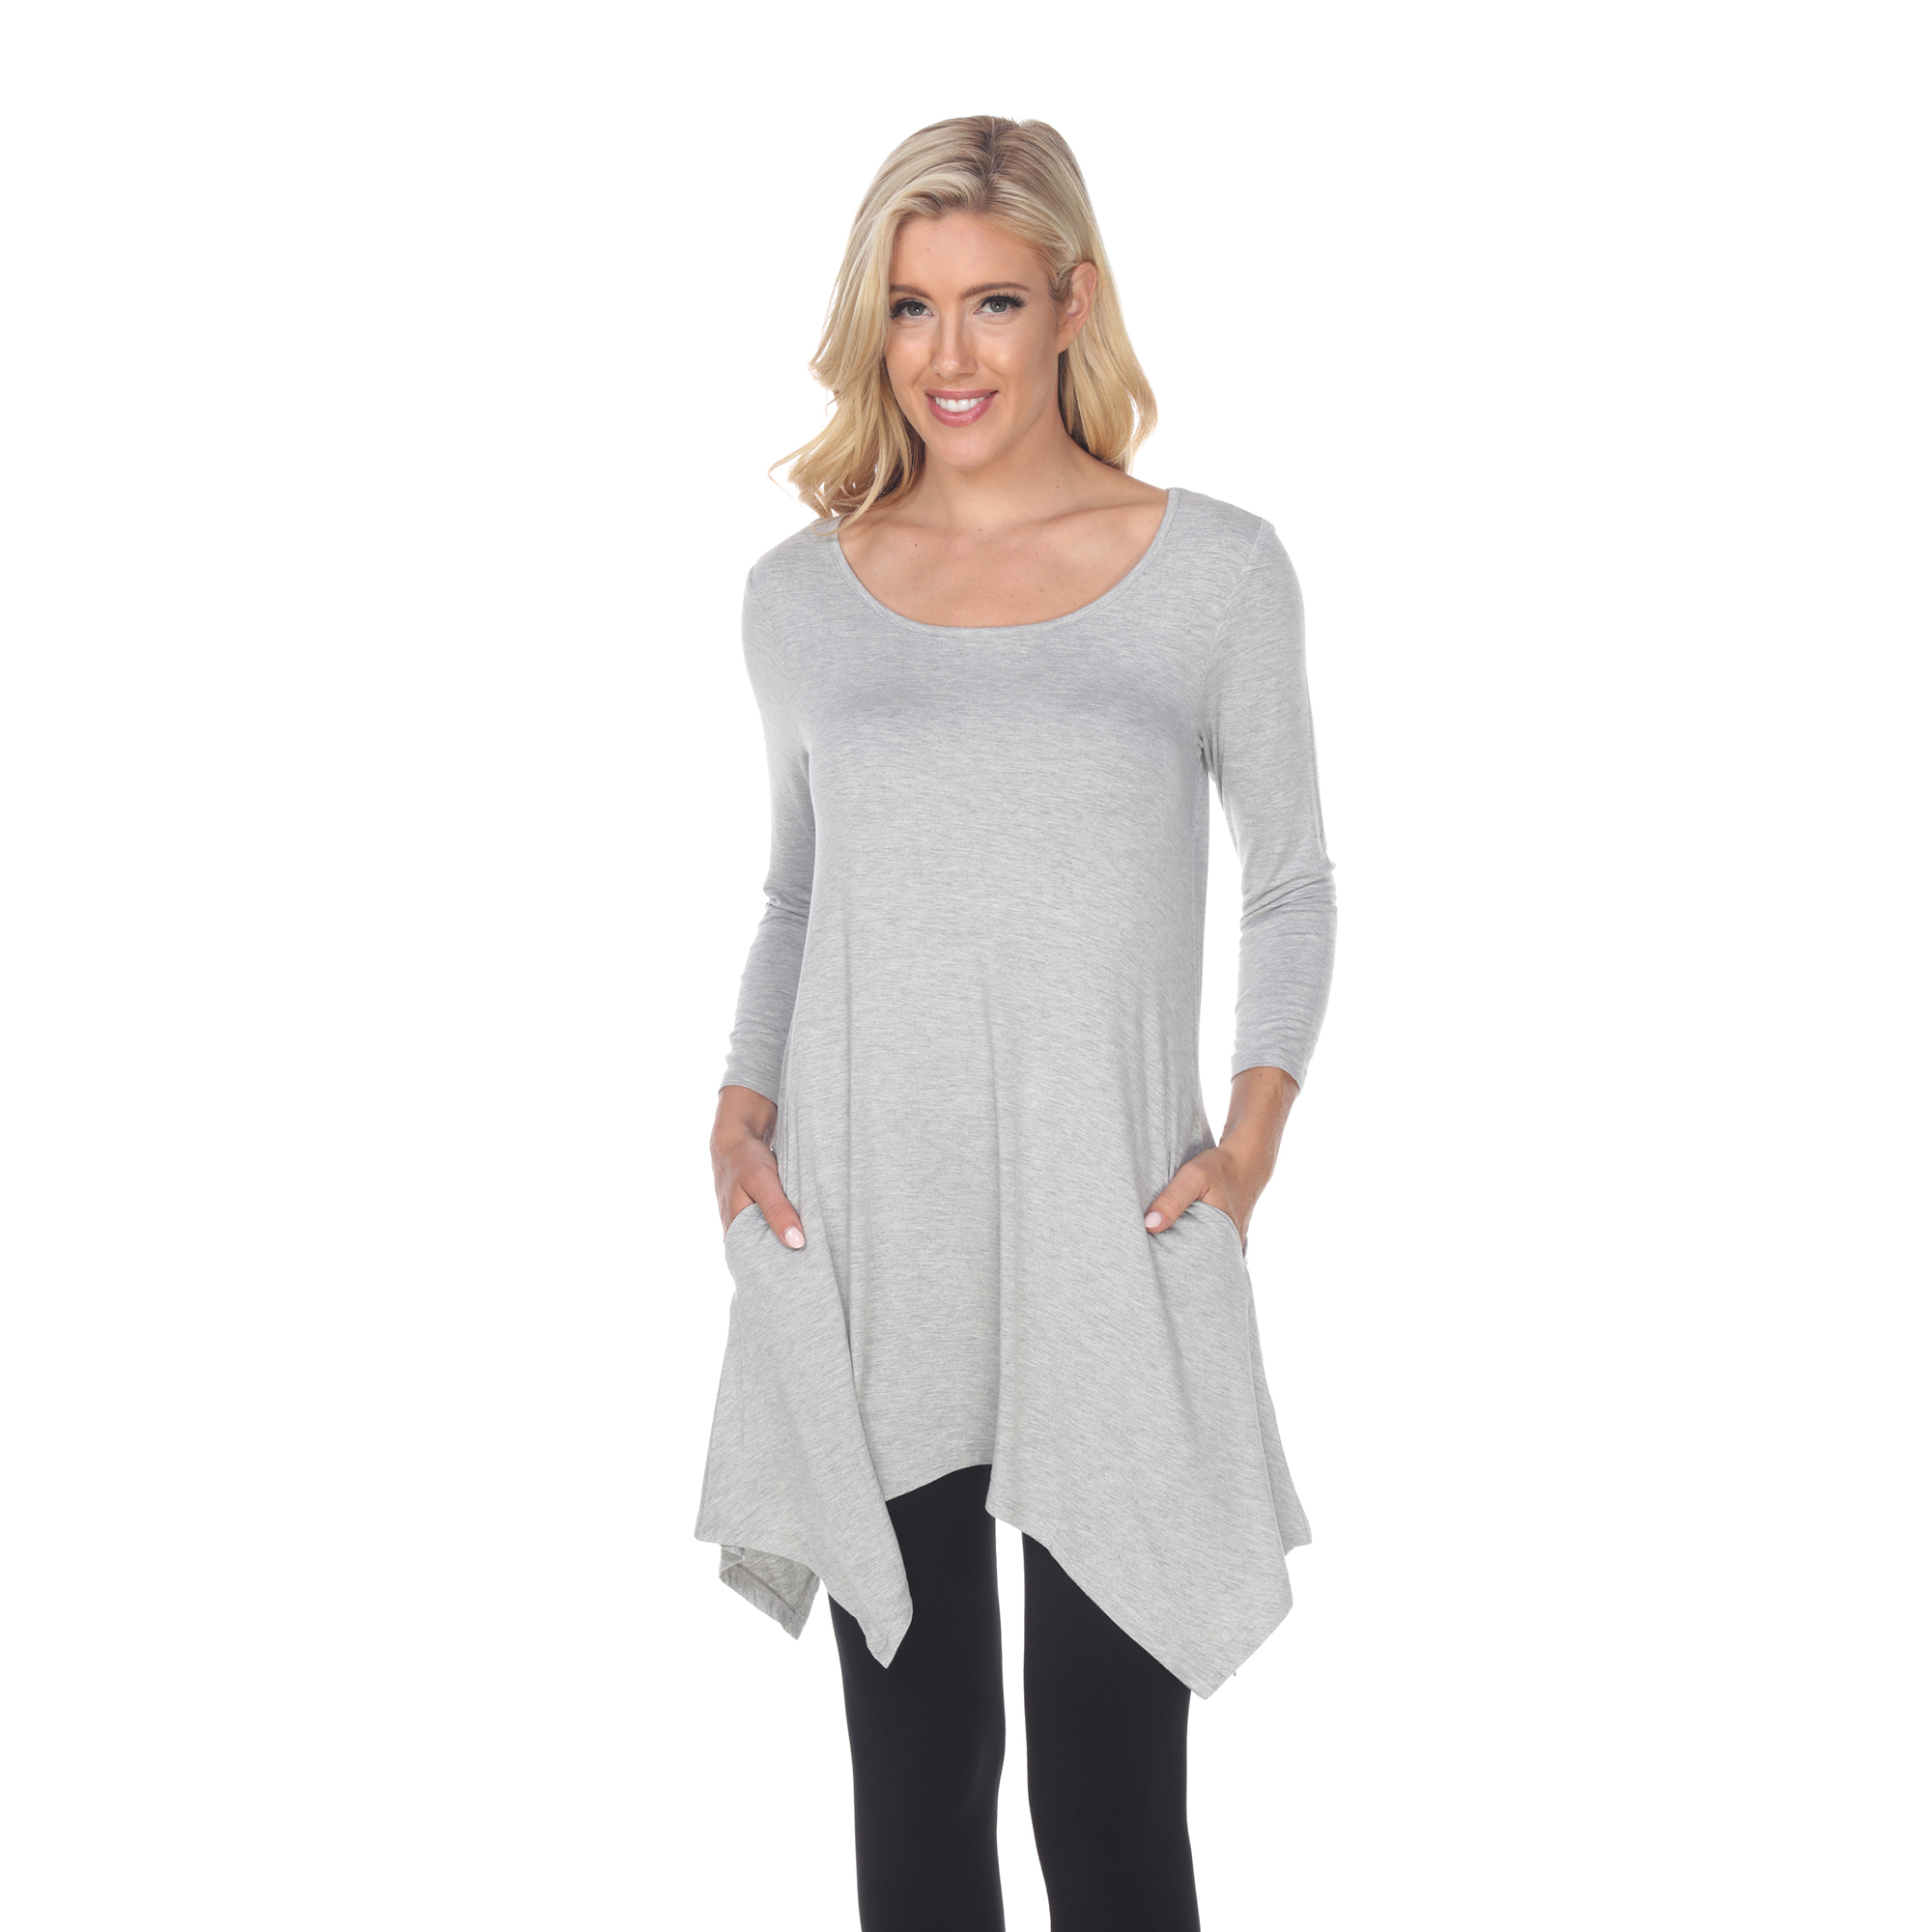 White Mark Women's Quarter Sleeve Tunic Top With Pockets - Heather Grey, 2X